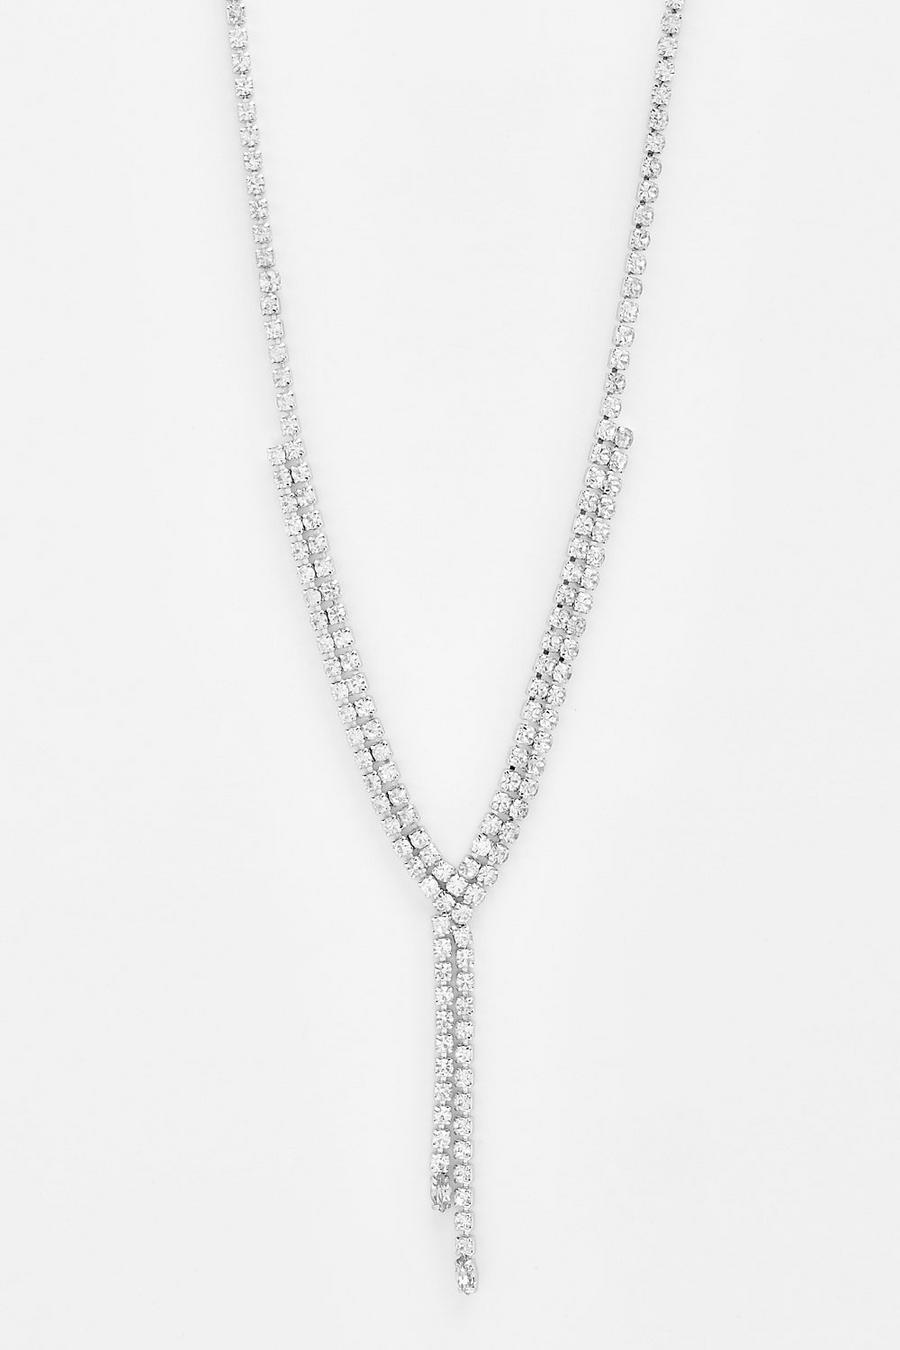 Silver Oval Droplet Crystal Row Necklace